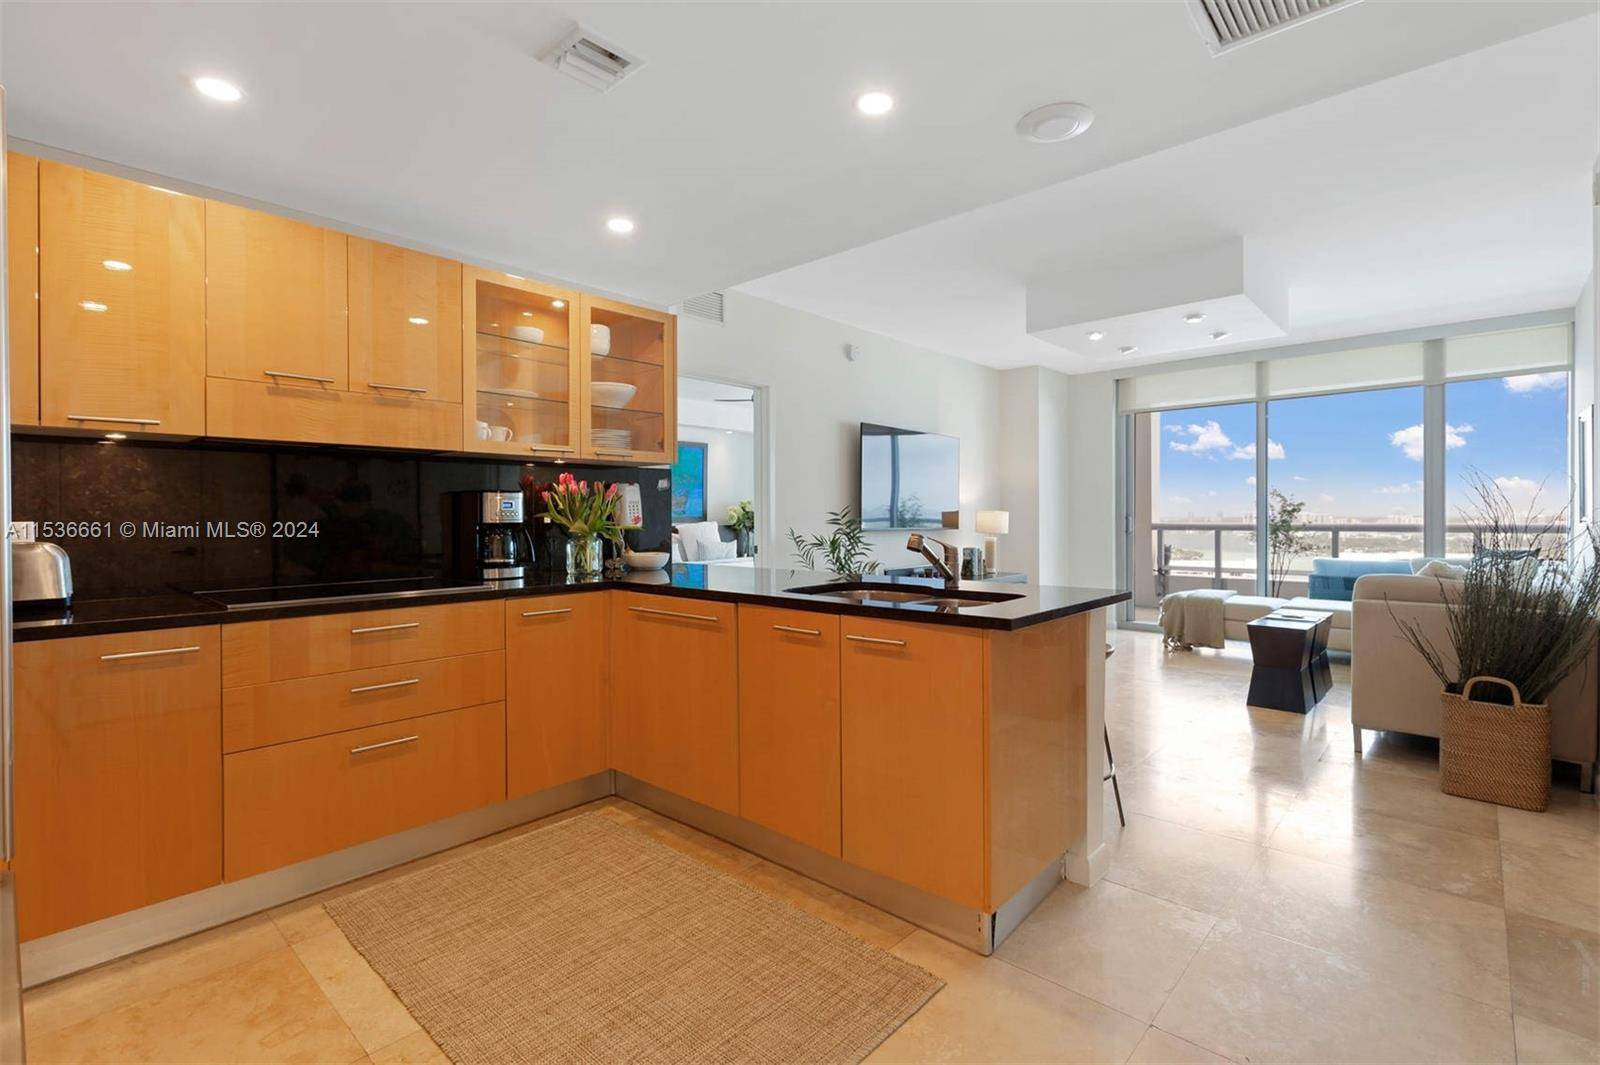 Enjoy this penthouse residence with an oversized terrace and split floor plan.